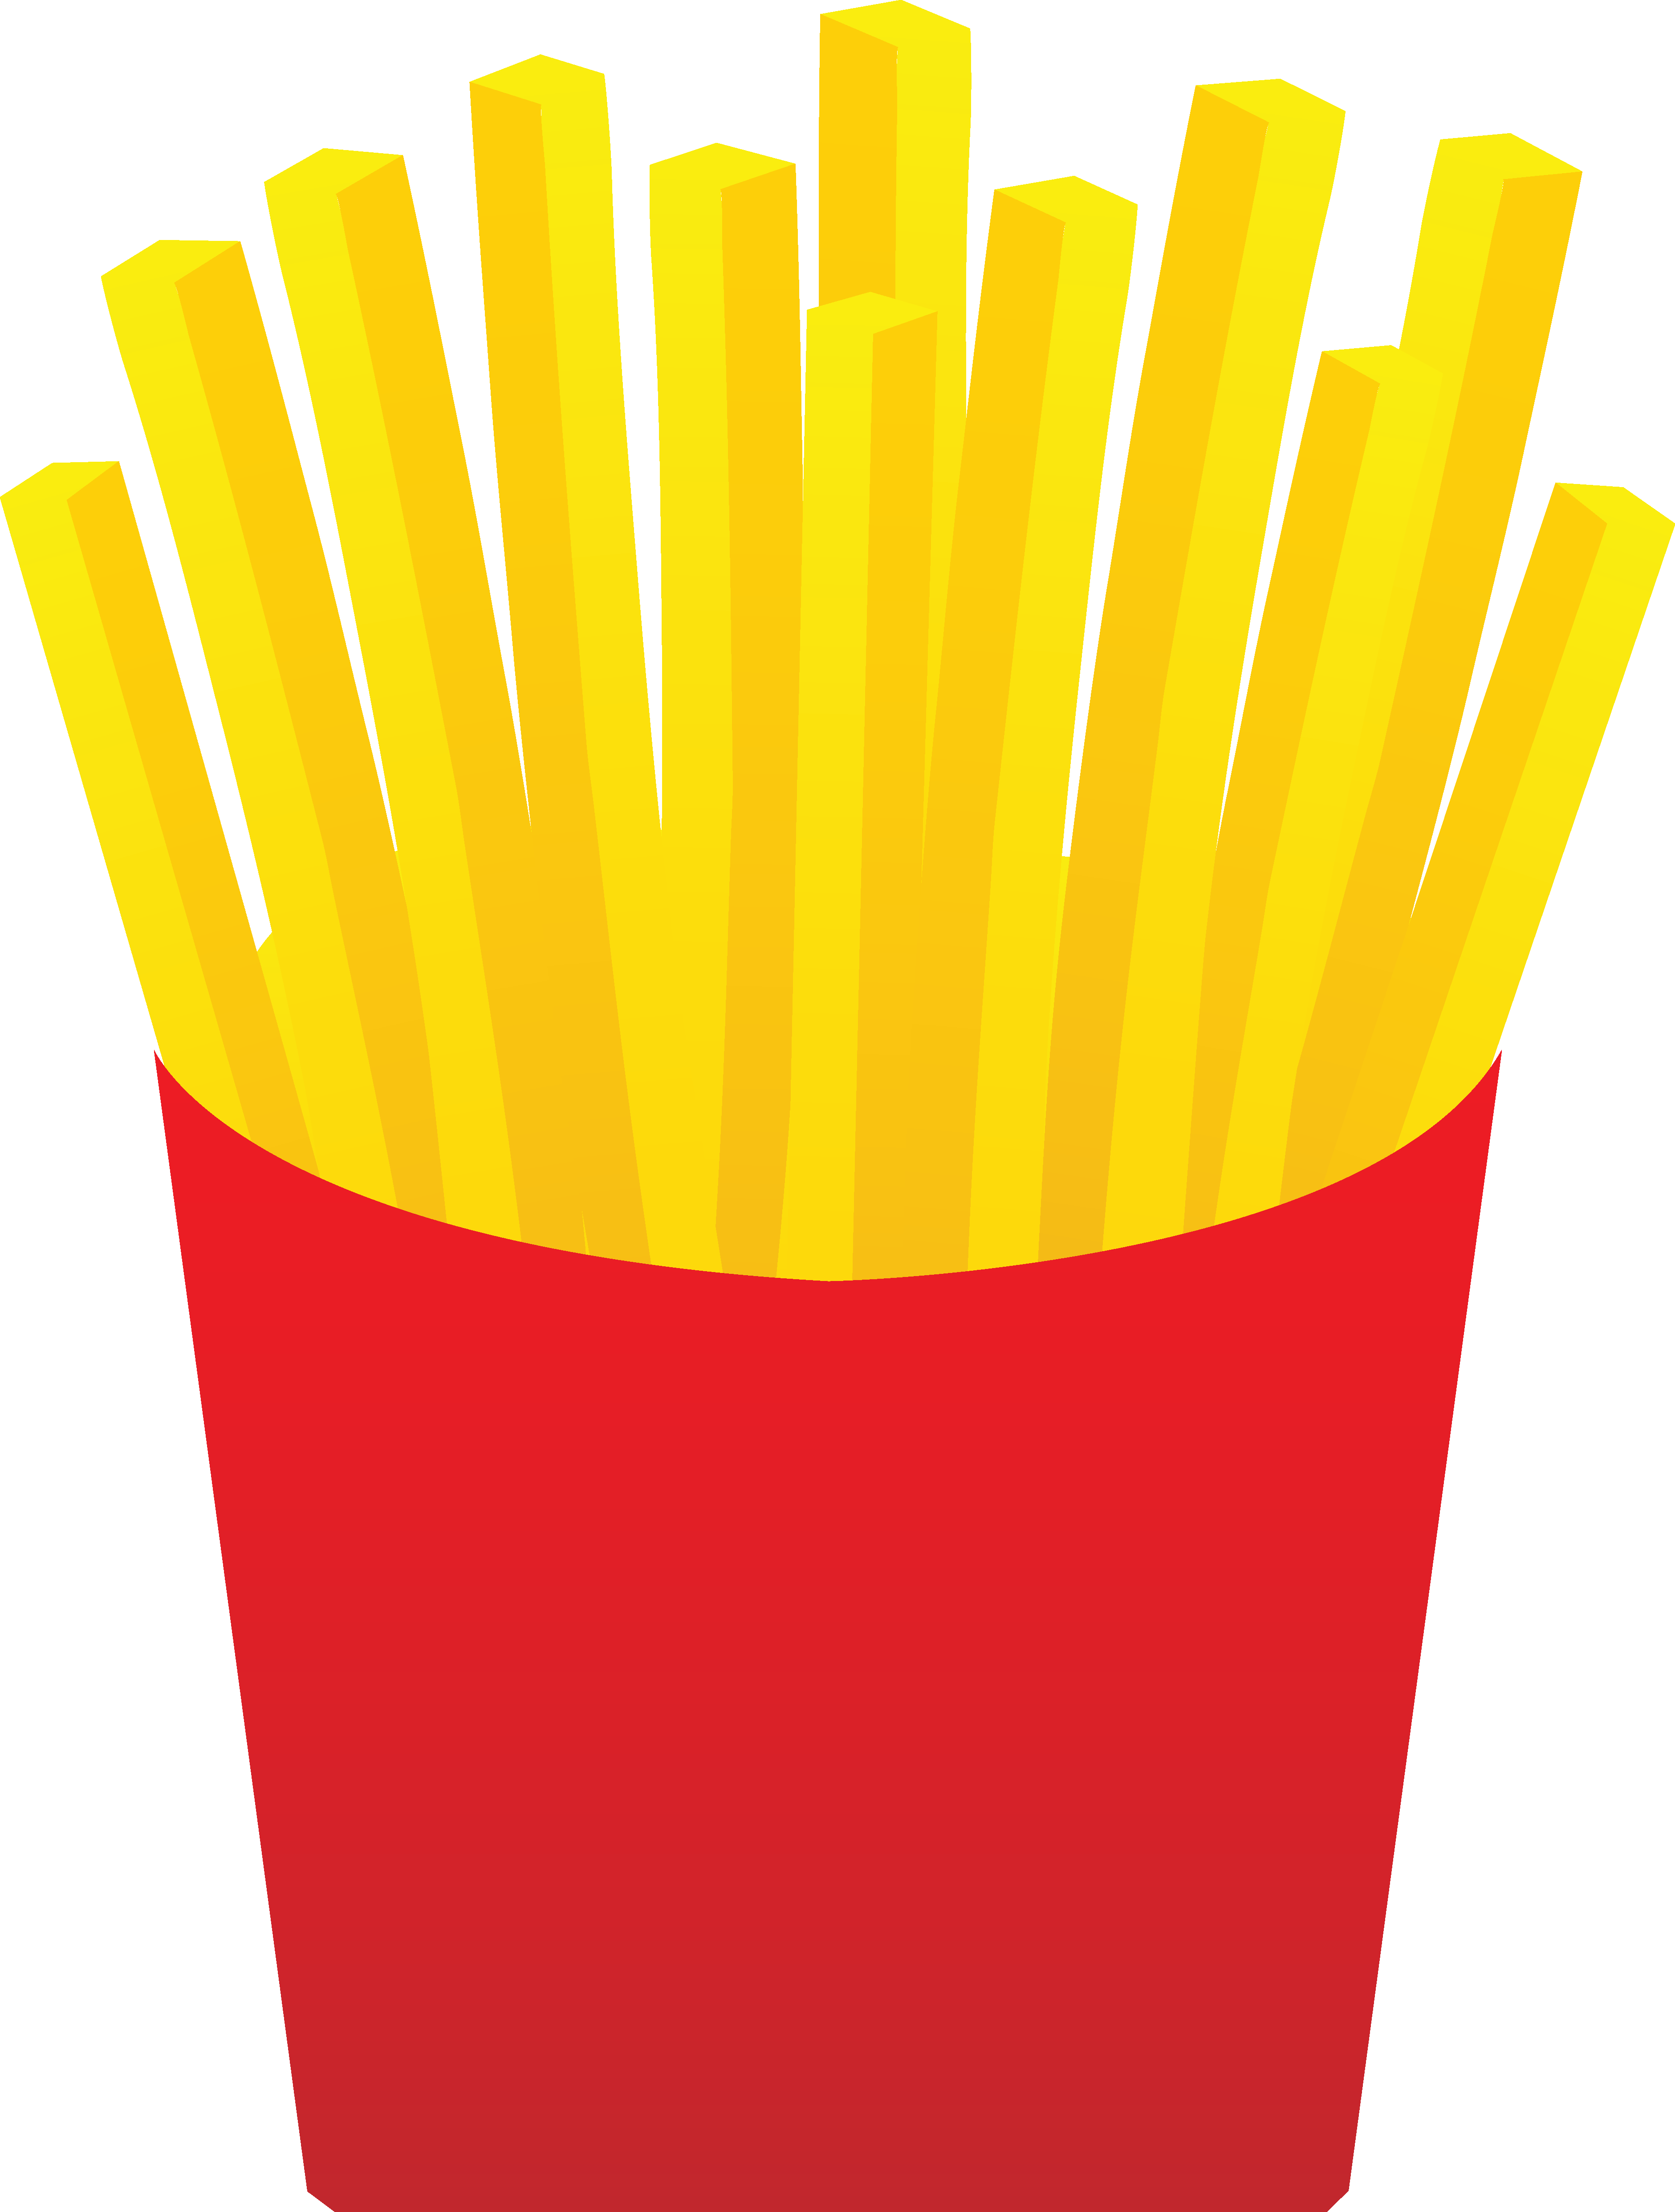 French fry clipart free